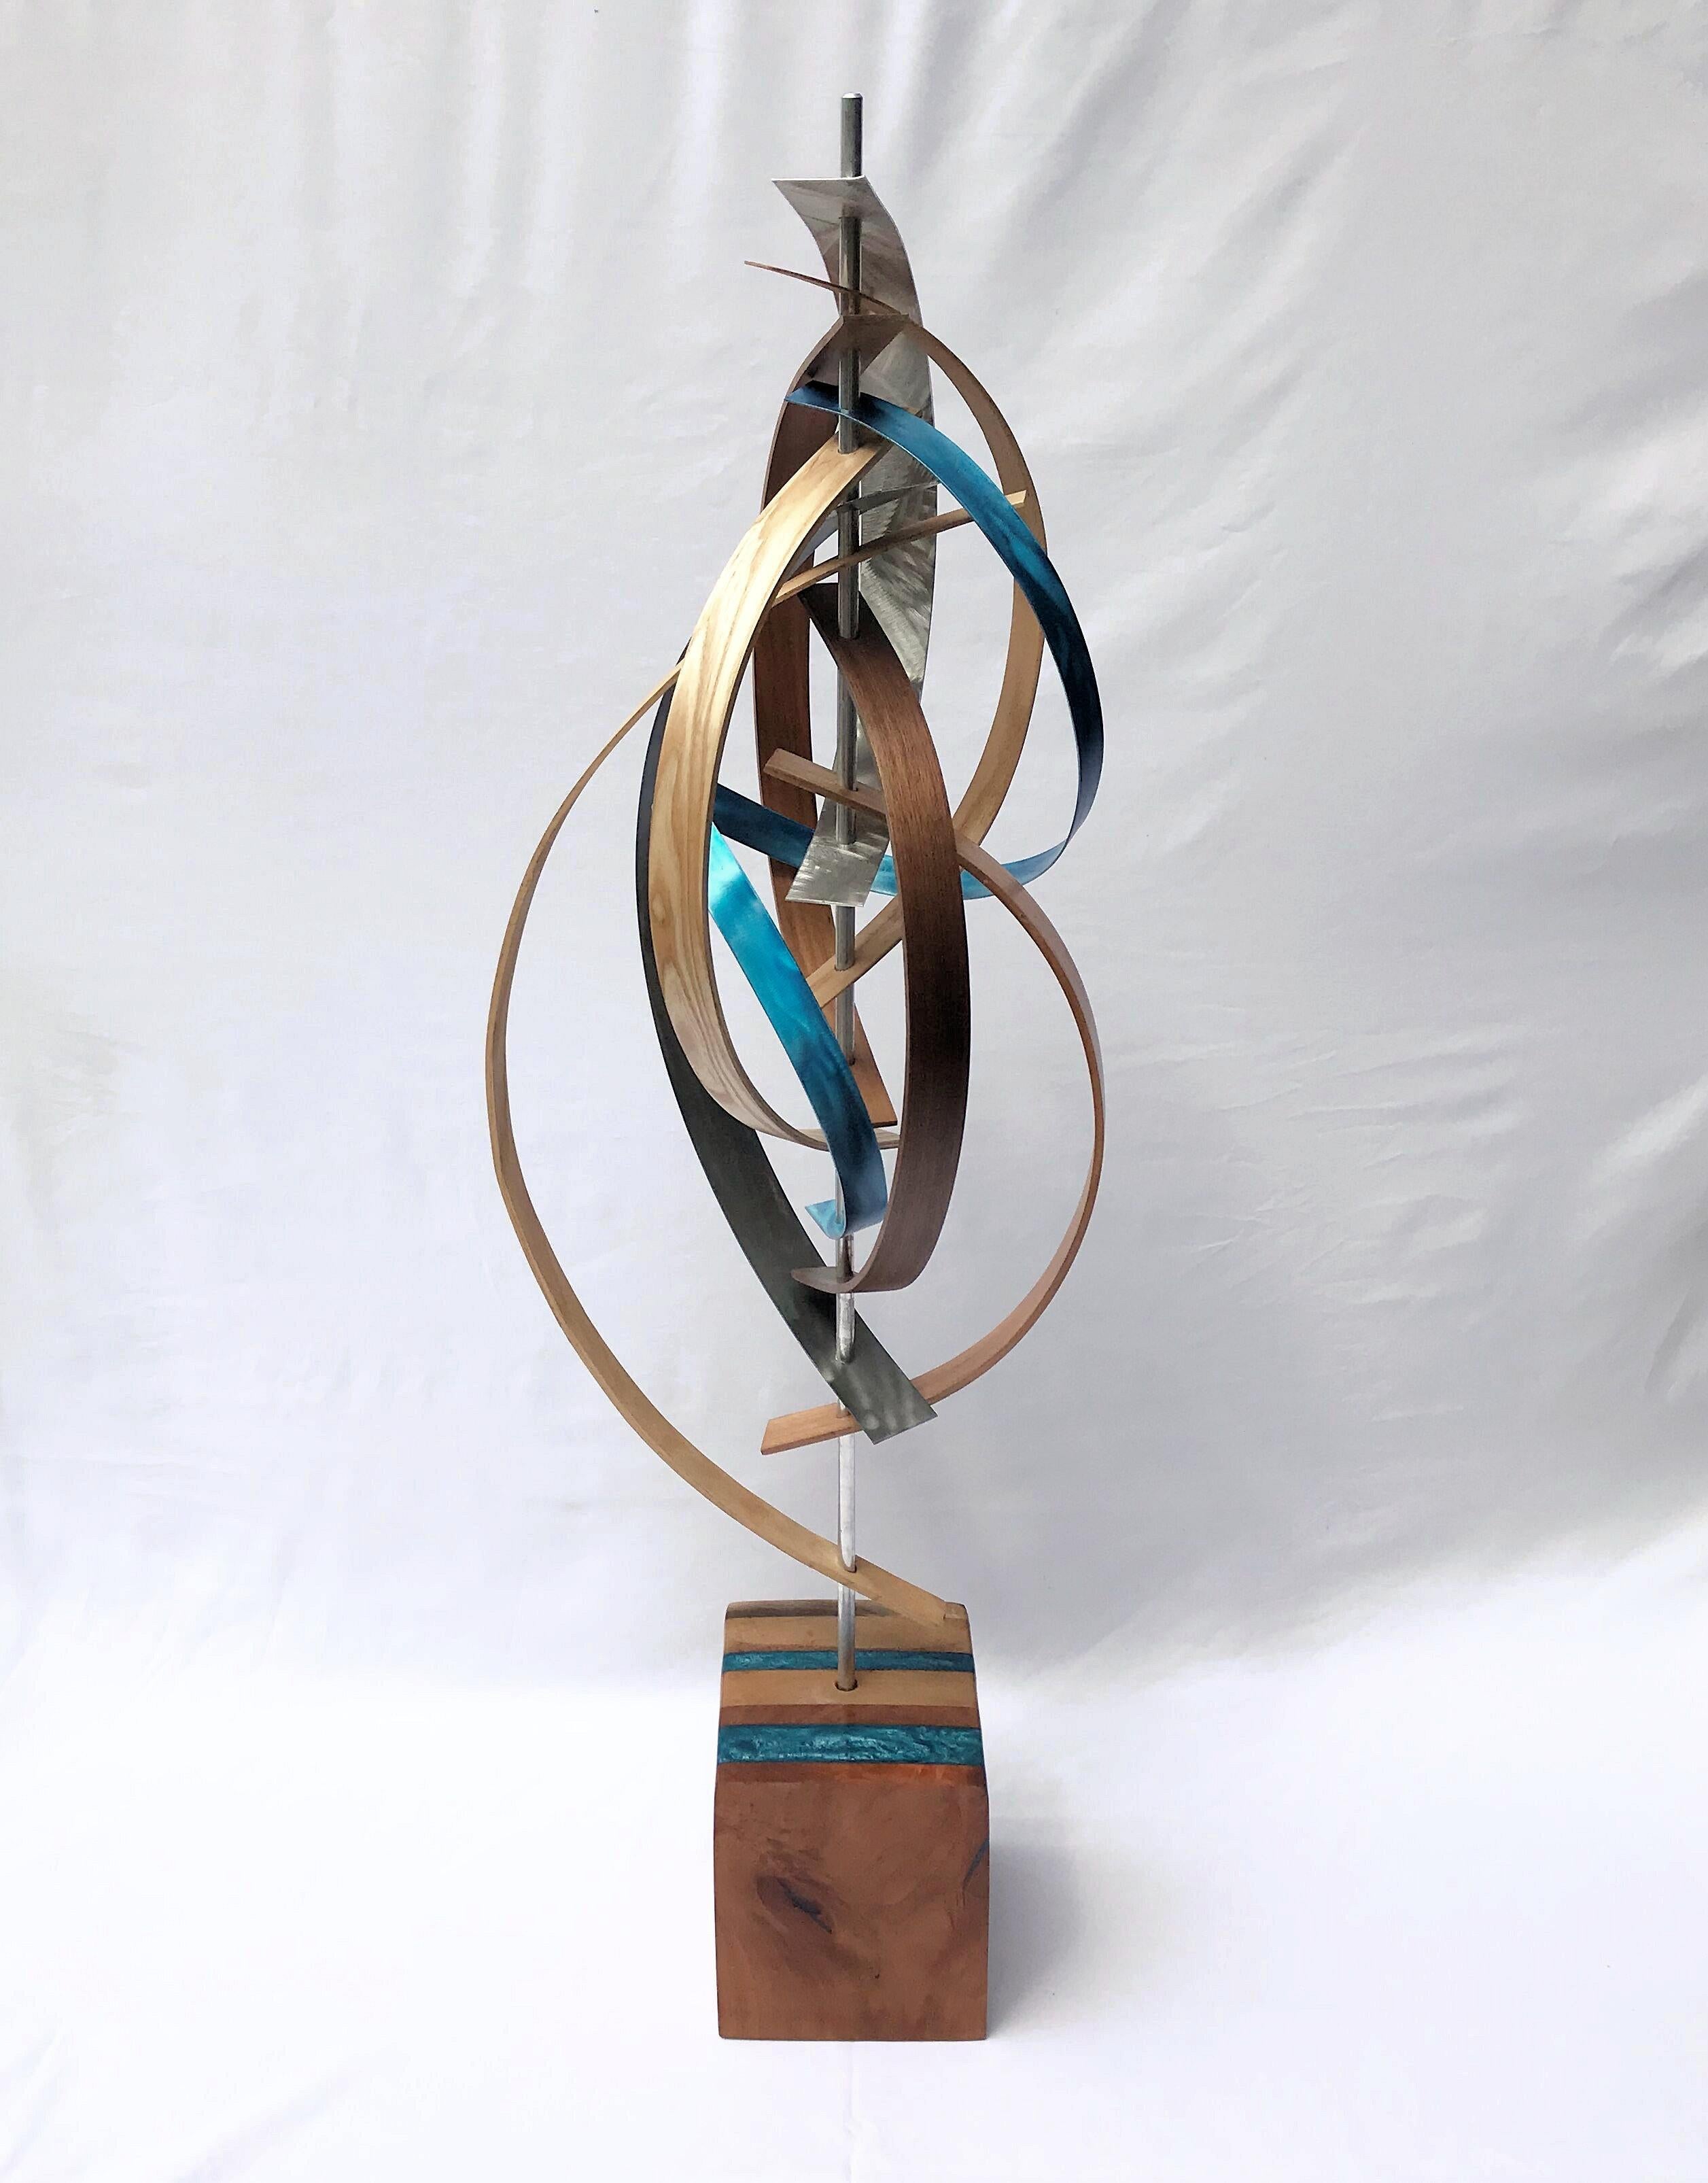 Jeff Linenkugel Abstract Sculpture - Wood and Metal Free-Standing Sculpture Mid-Century Modern Contemporary Rustic 